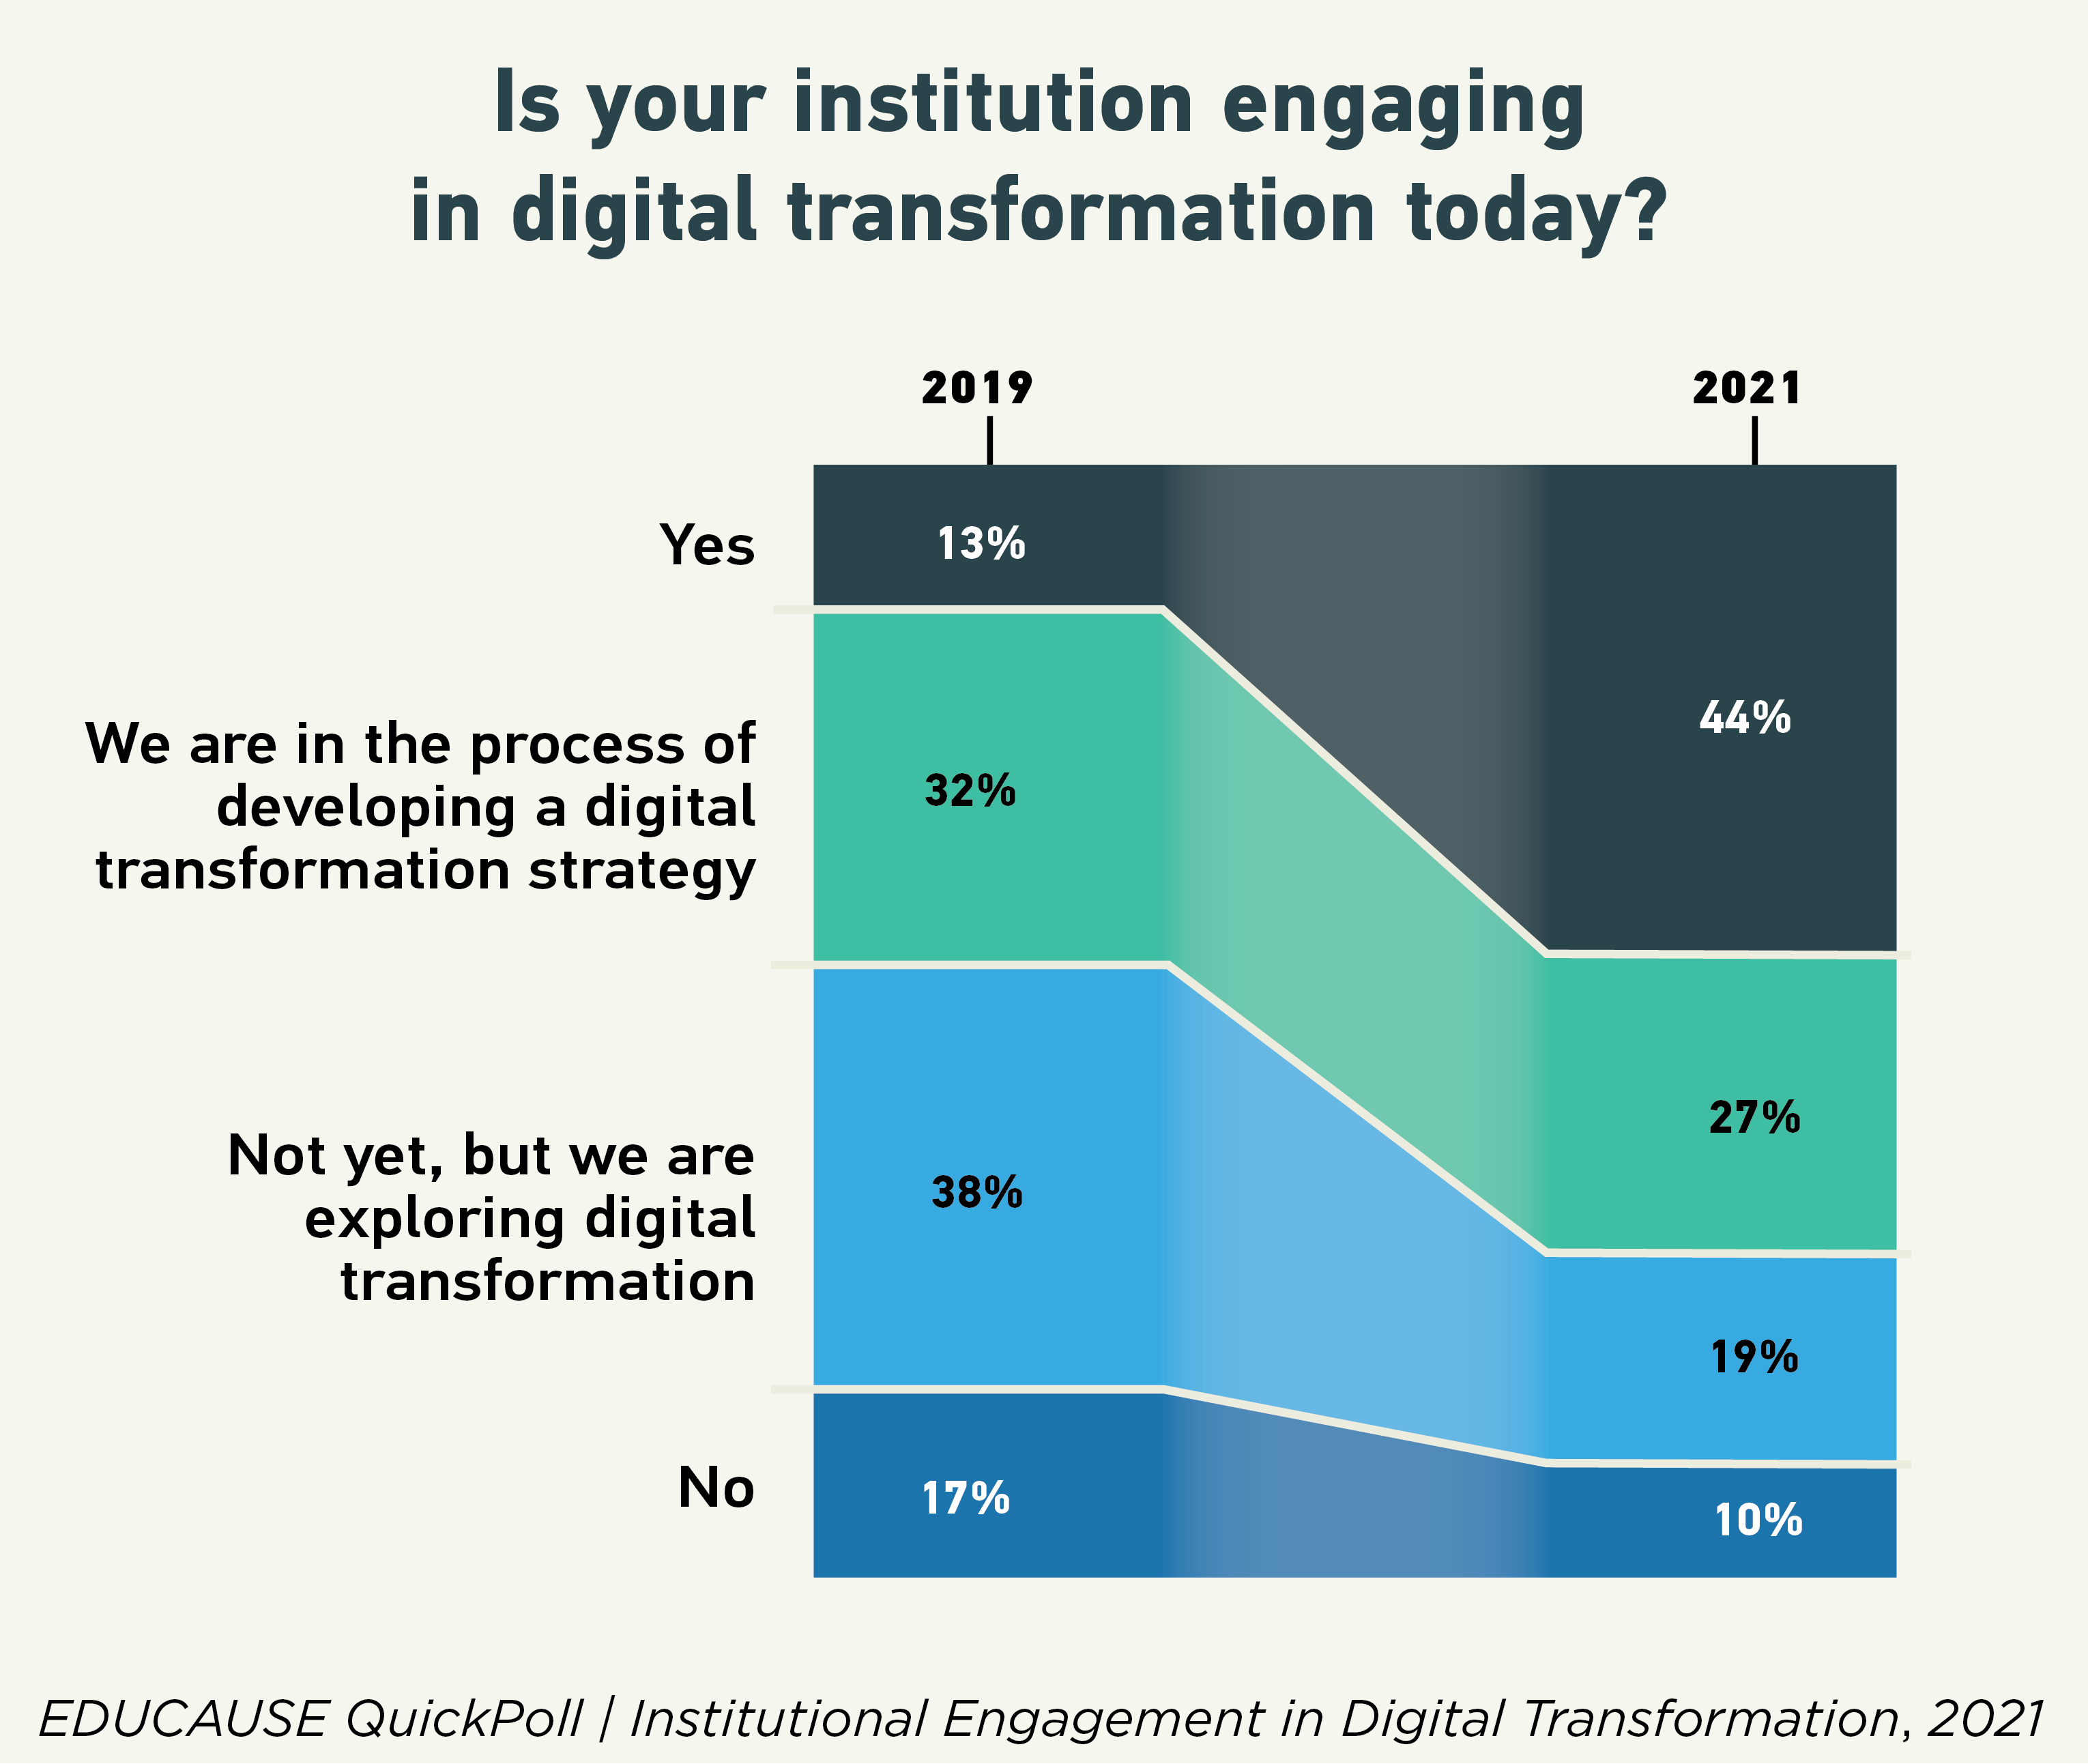 Is your institution engaging in digital transformation today?  Yes: 2019 13%, 2021 44%.  We are in the process of developing a digital transformation strategy: 2019 32%, 2021 27%.  Not yet, but we are exploring digital transformation: 2019 38%, 2021 19%.  No: 2019 17%, 2021 10%.  EDUCAUSE QuickPoll/Institutional Engagement in Digital Transformation, 2021.